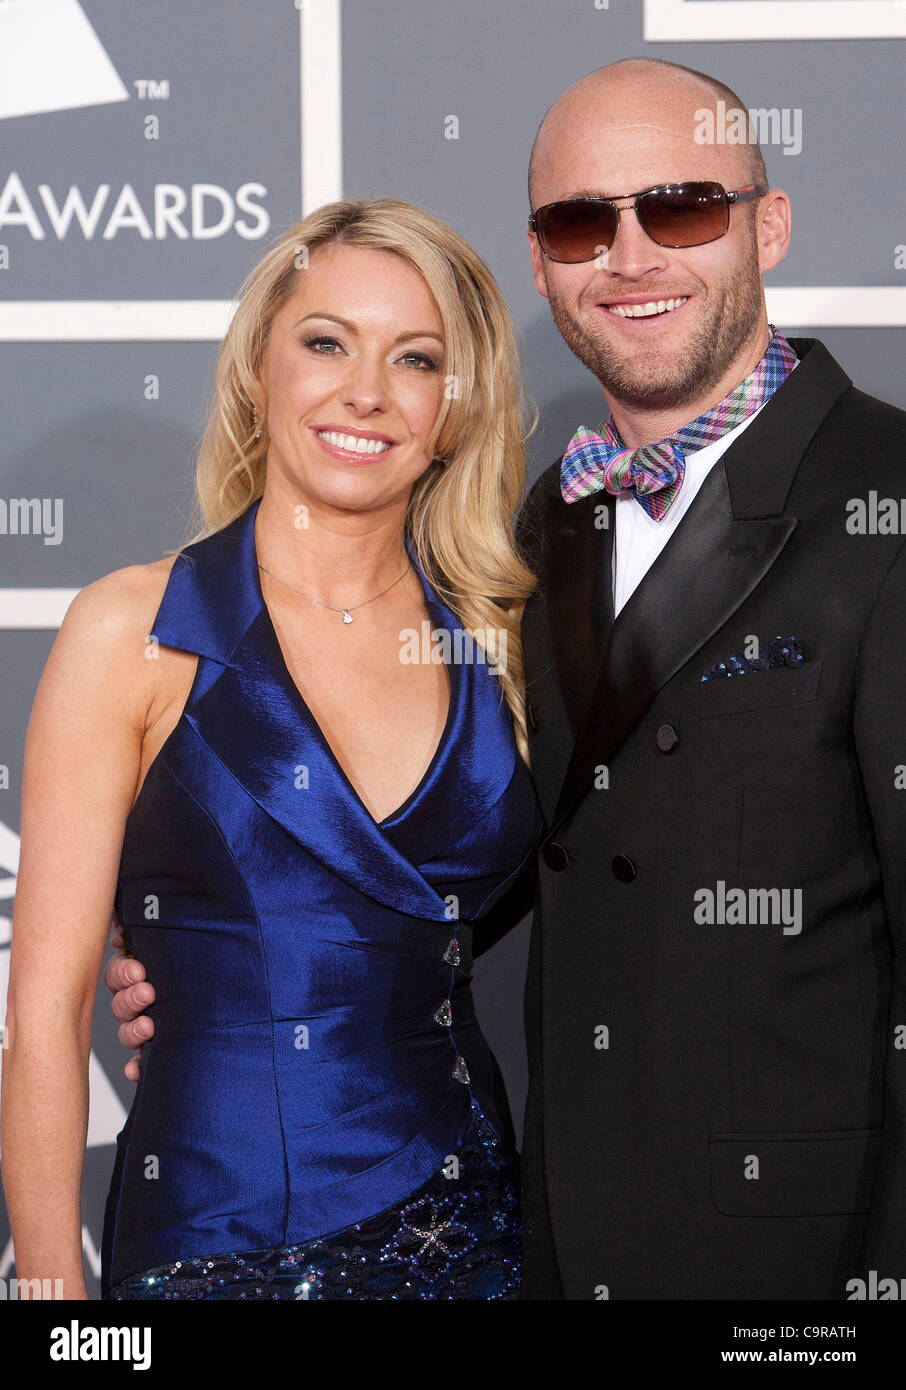 Bill Borger and Monika Jensen on the red carpet of the 54th Annual Grammy Awards at the Staples Center in Los Angeles, California on Sunday, February 12, 2012. ADRIAN SANCHEZ-GONZALEZ/PI Stock Photo